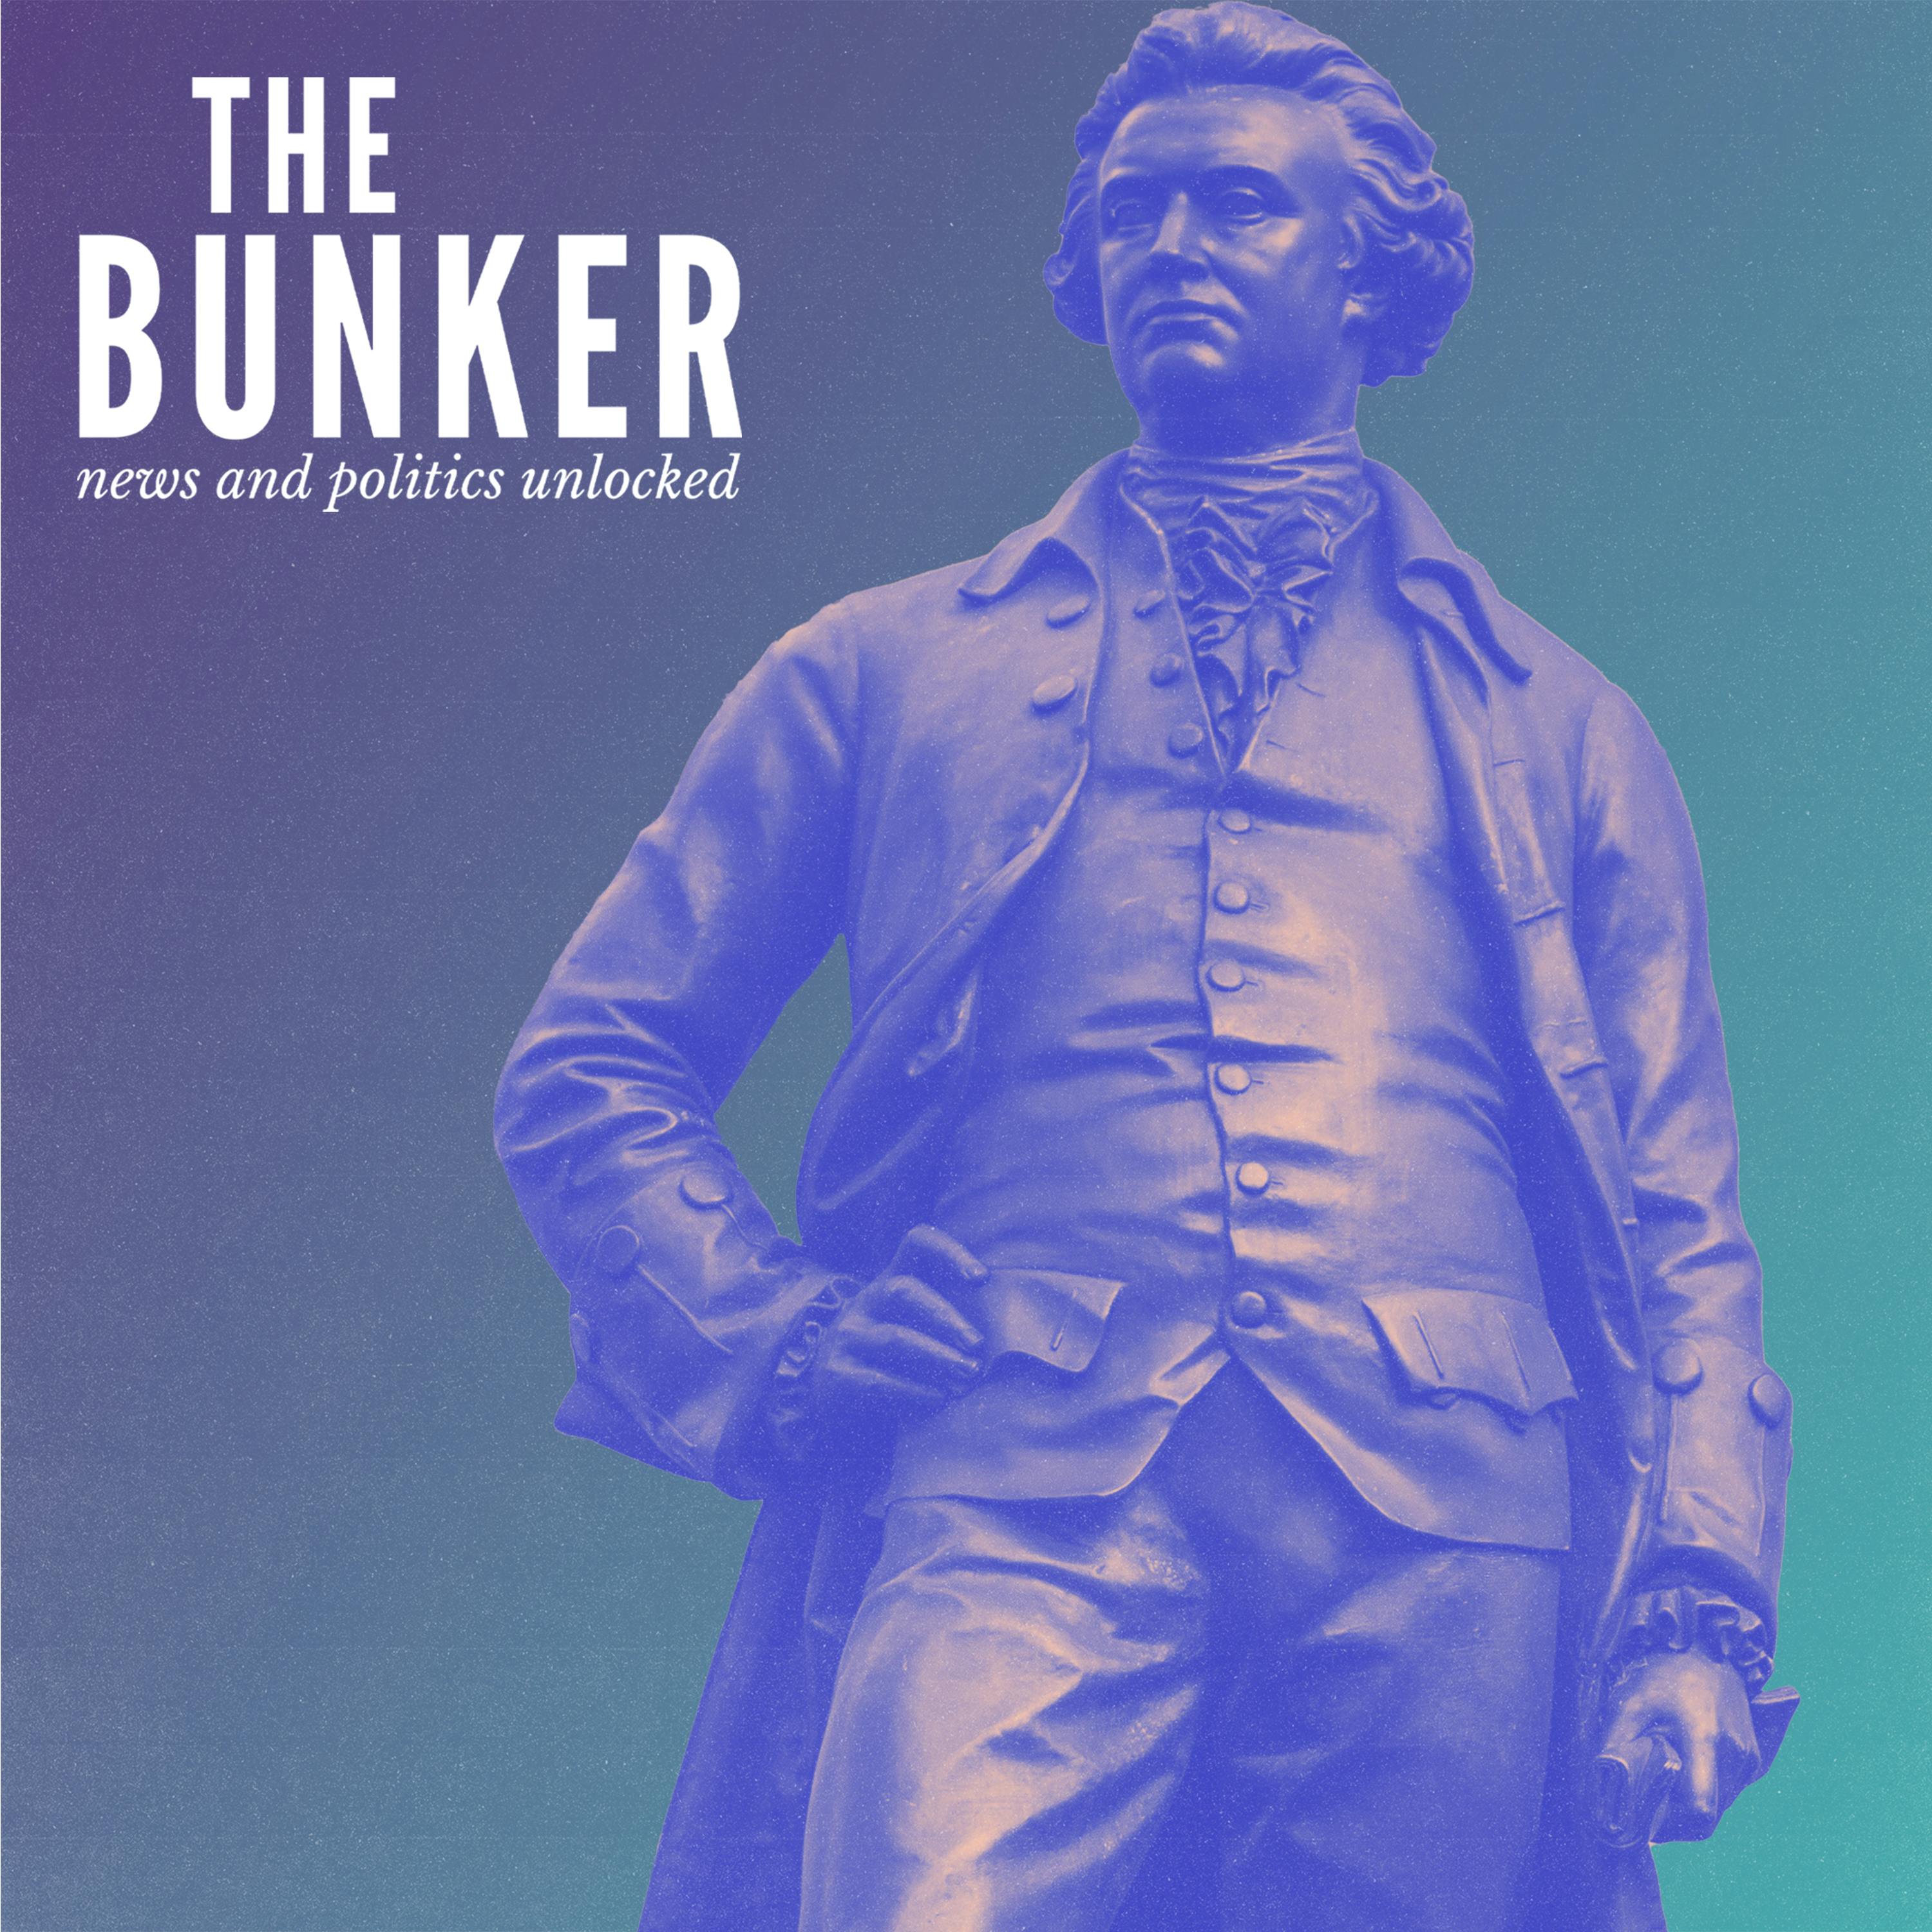 By the Burke: The man who invented modern-day conservatism